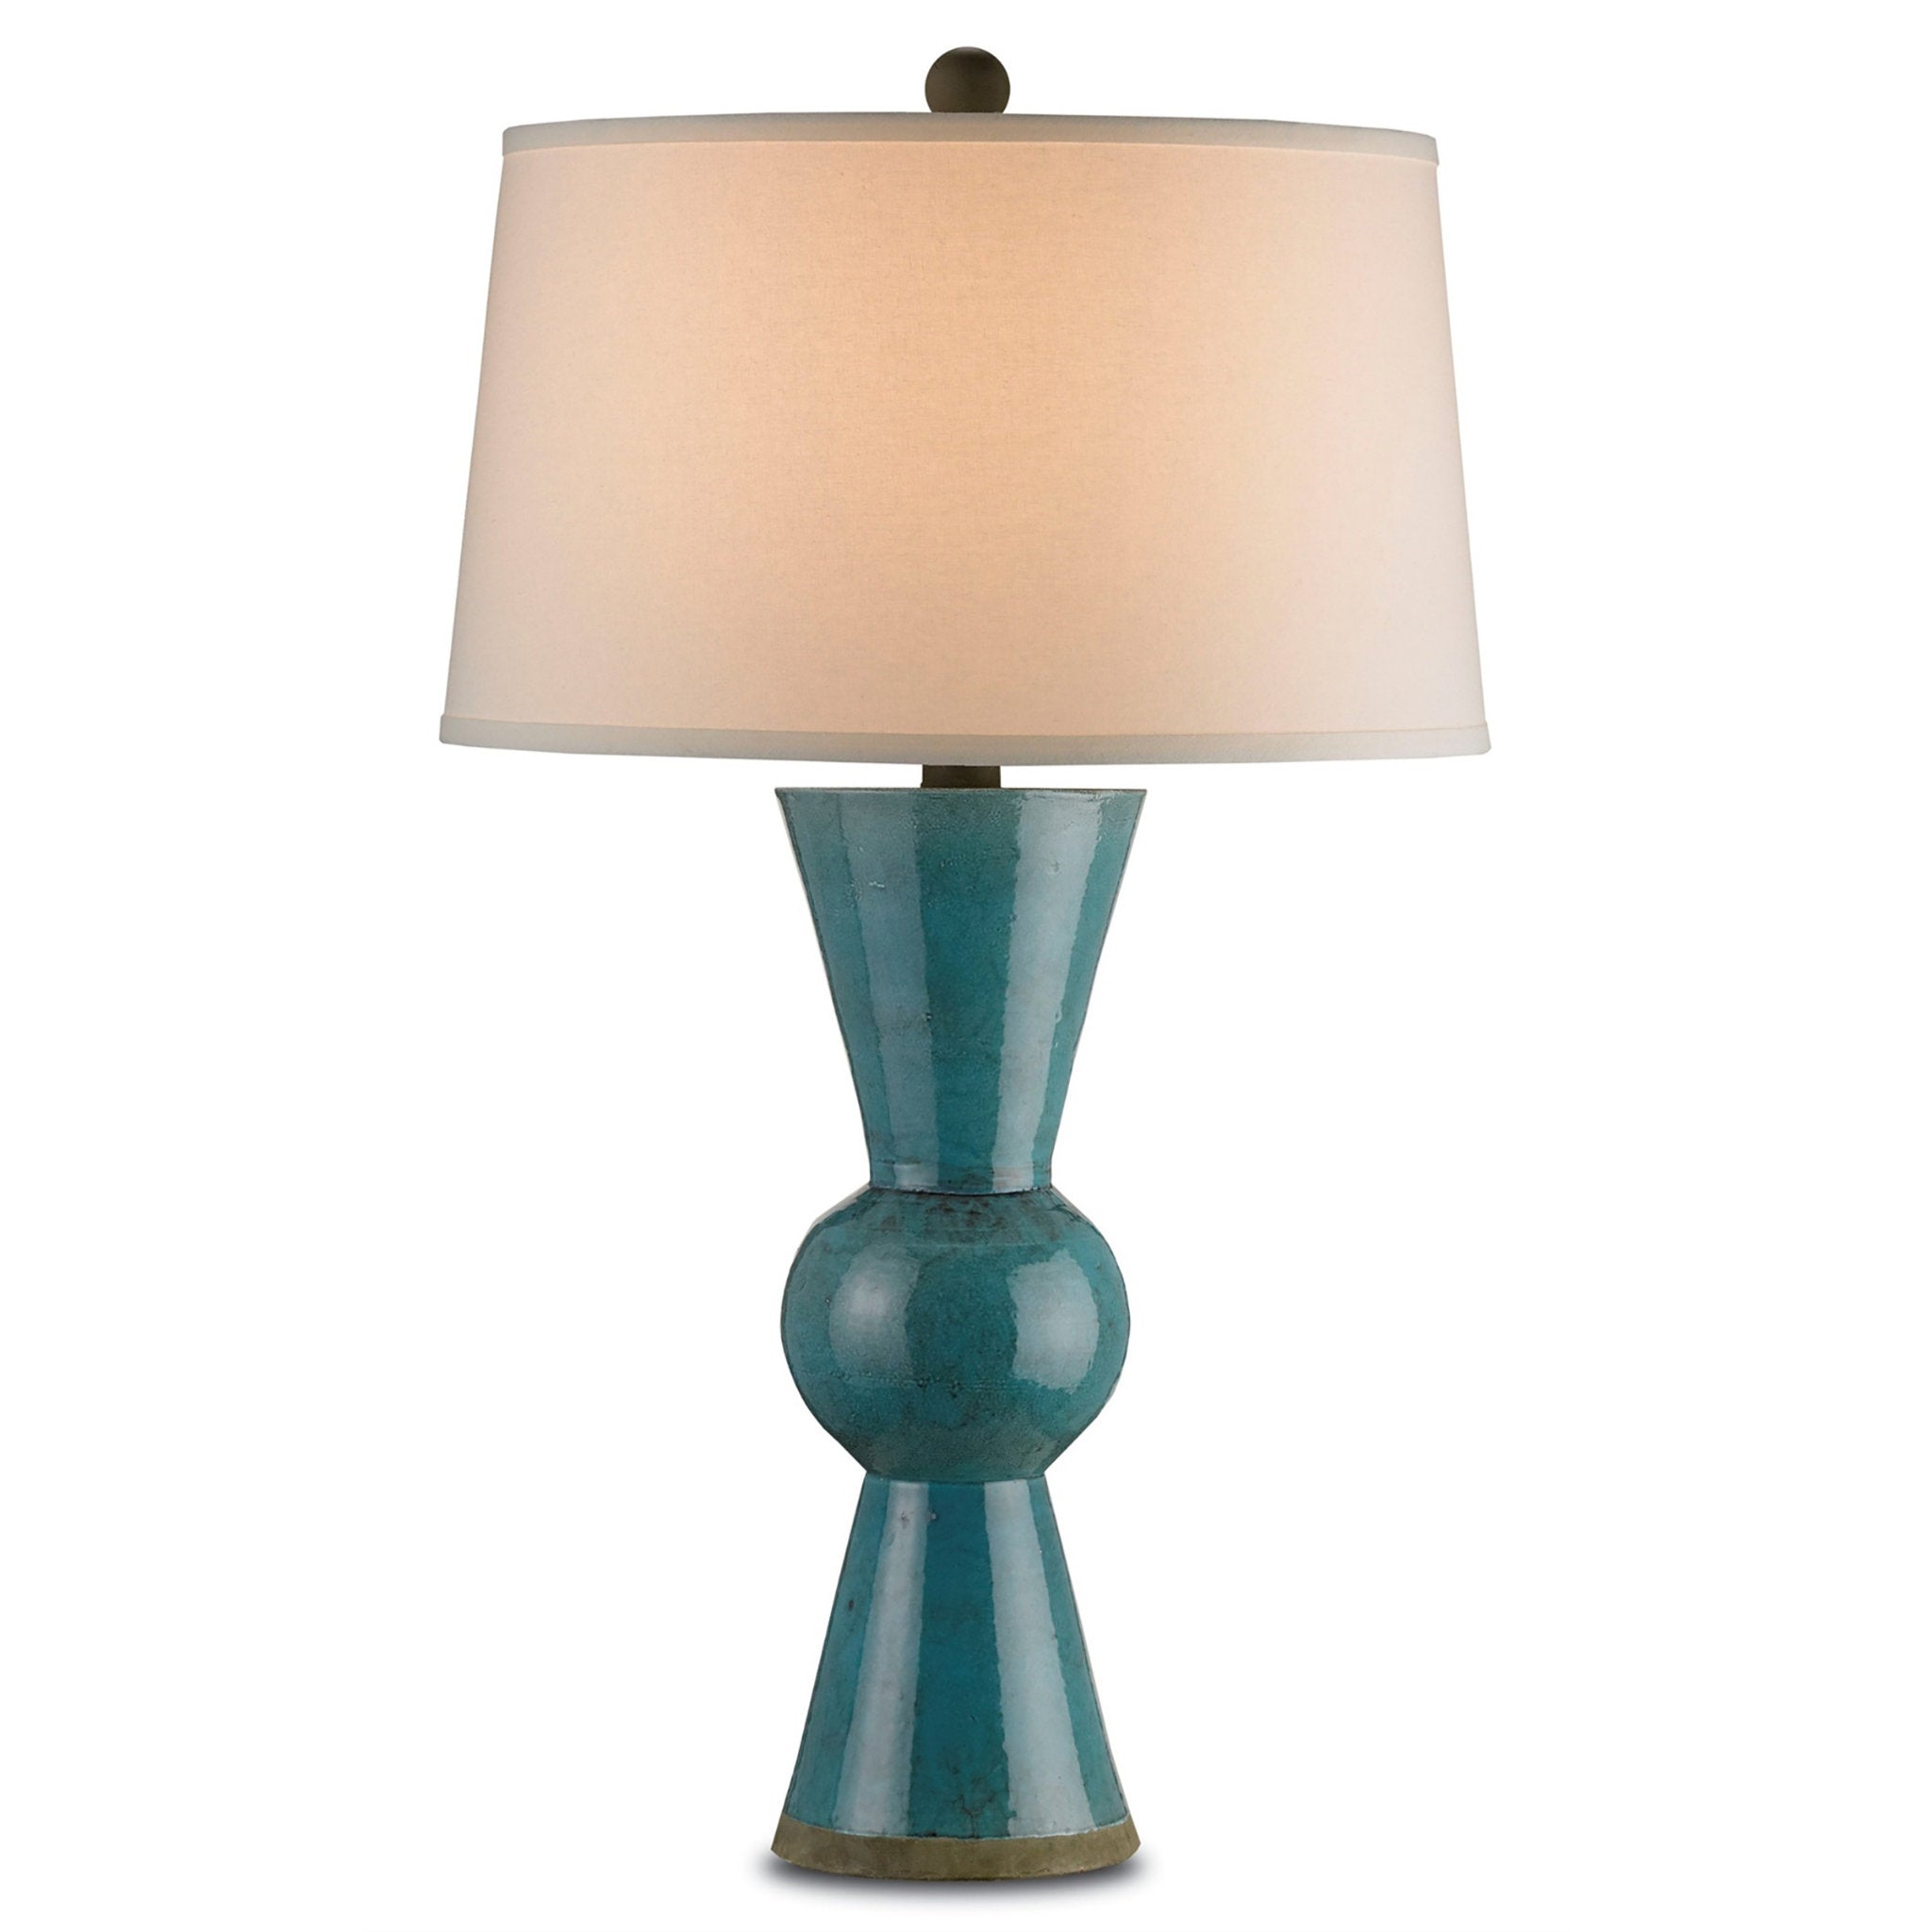 Upbeat Teal Table Lamp - Teal